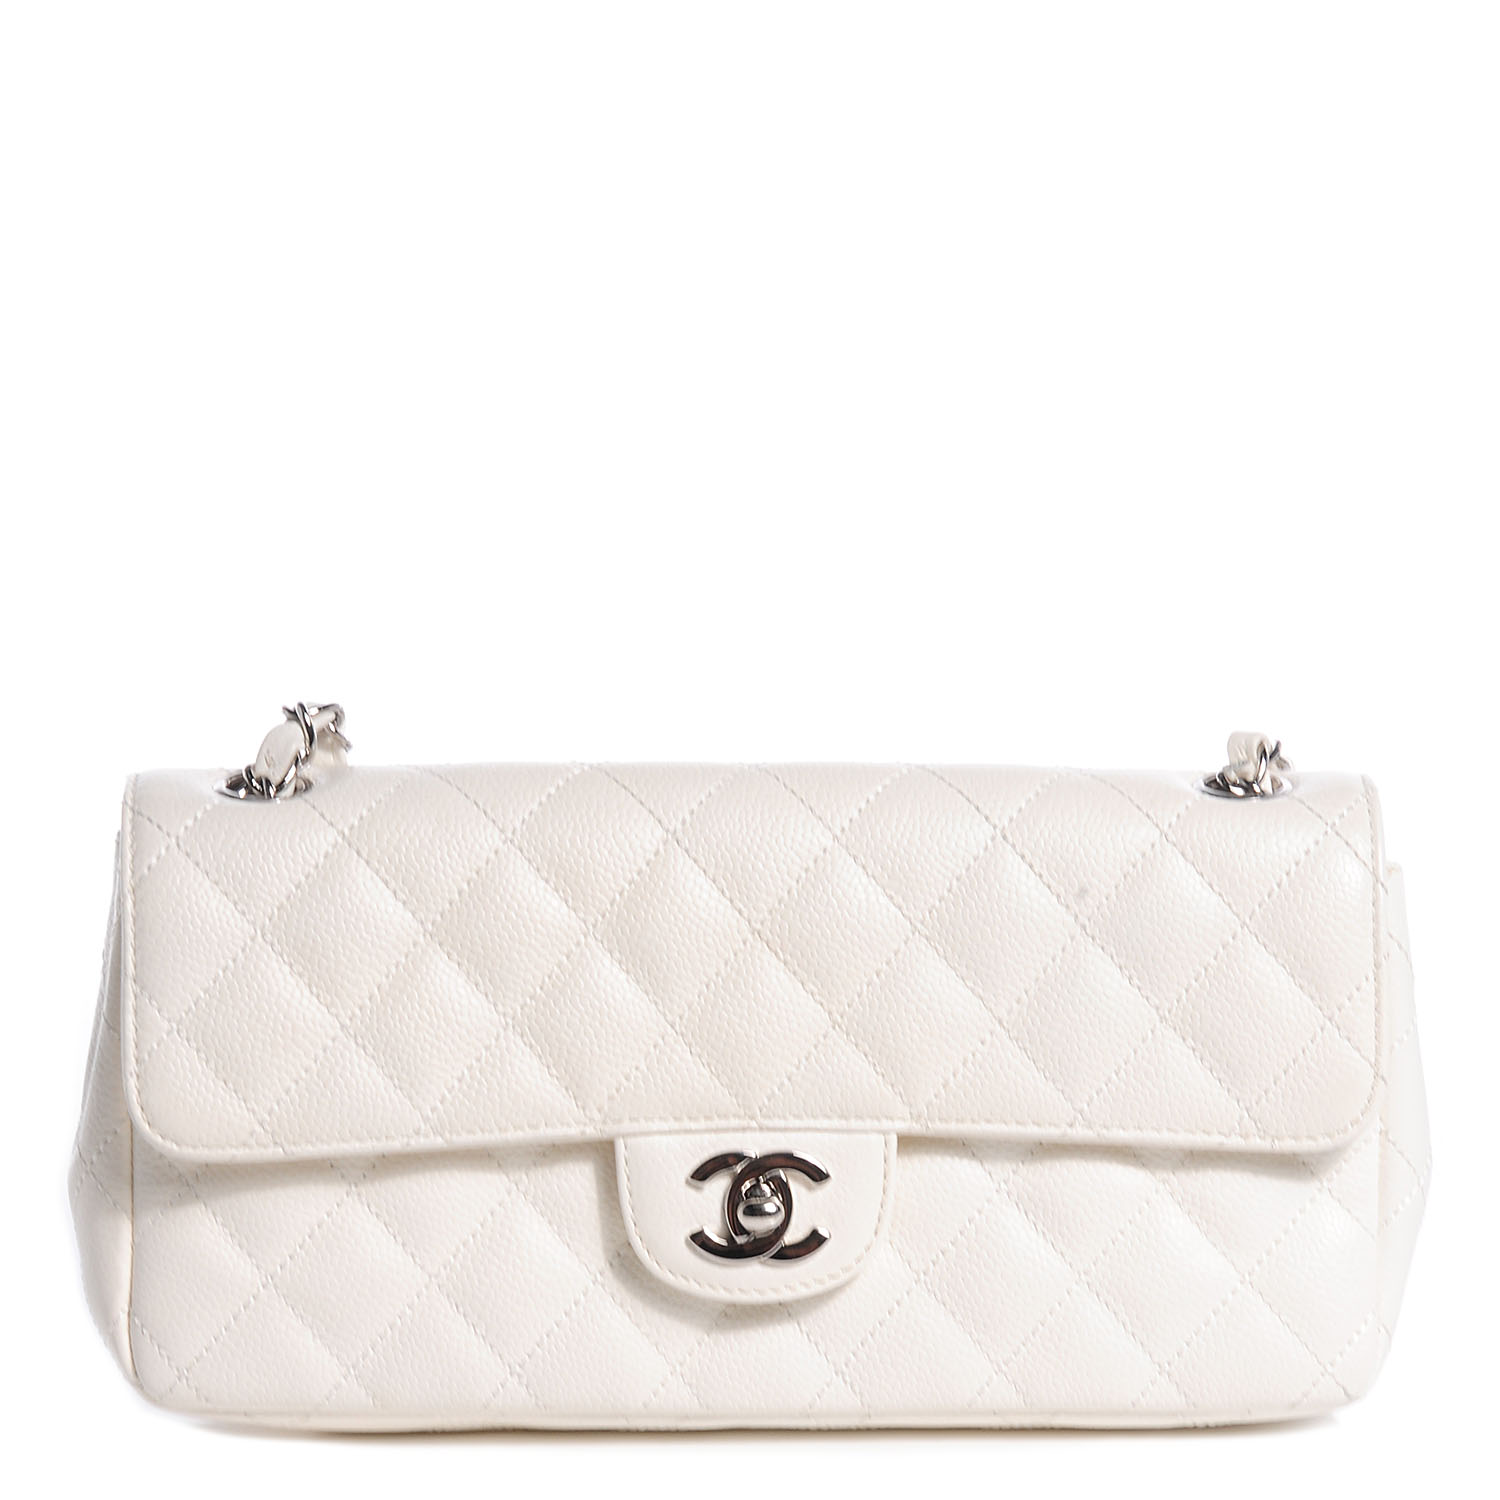 CHANEL Caviar East West Flap White 76620